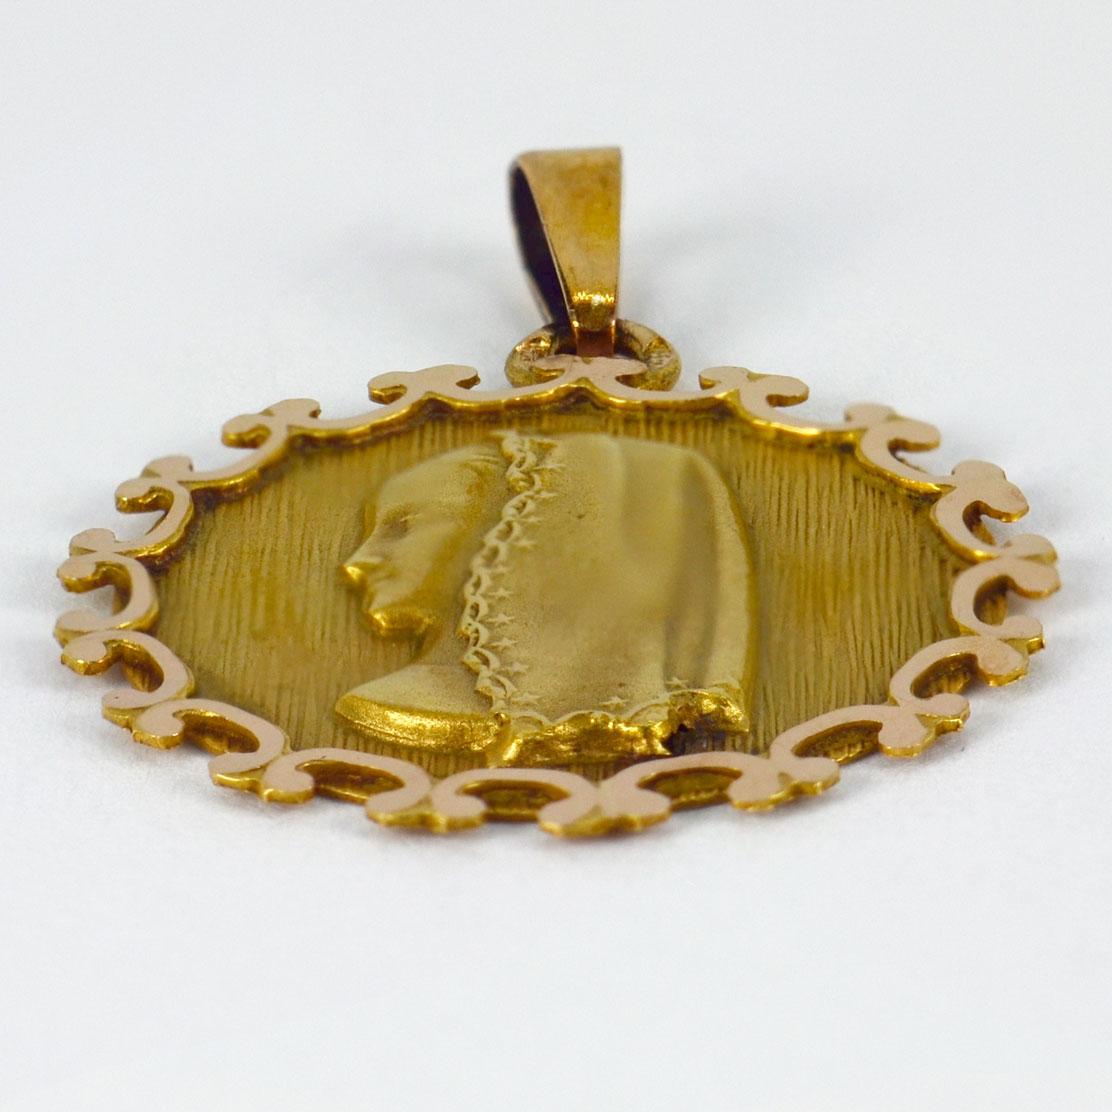 An 18 karat (18K) yellow gold pendant designed as a round medal with petal edges depicting the Virgin Mary. Stamped with the eagle’s head for French manufacture and 18 karat gold, with unknown maker’s mark.

Dimensions: 2.4 x 2.1 x 0.1 cm (not